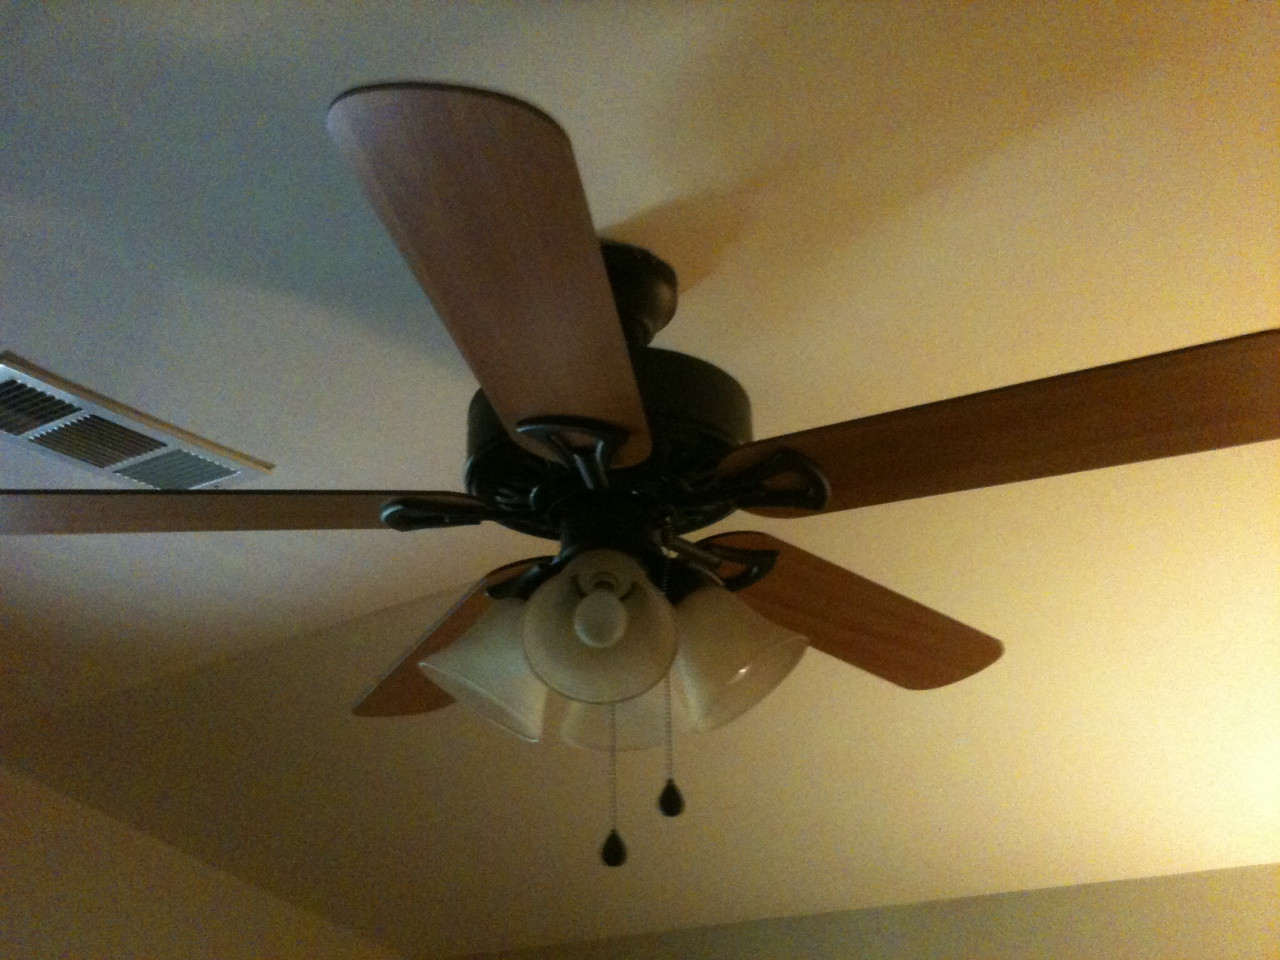 Installed Ceiling Fan Now Light Switch Not Working Properly intended for proportions 1280 X 960